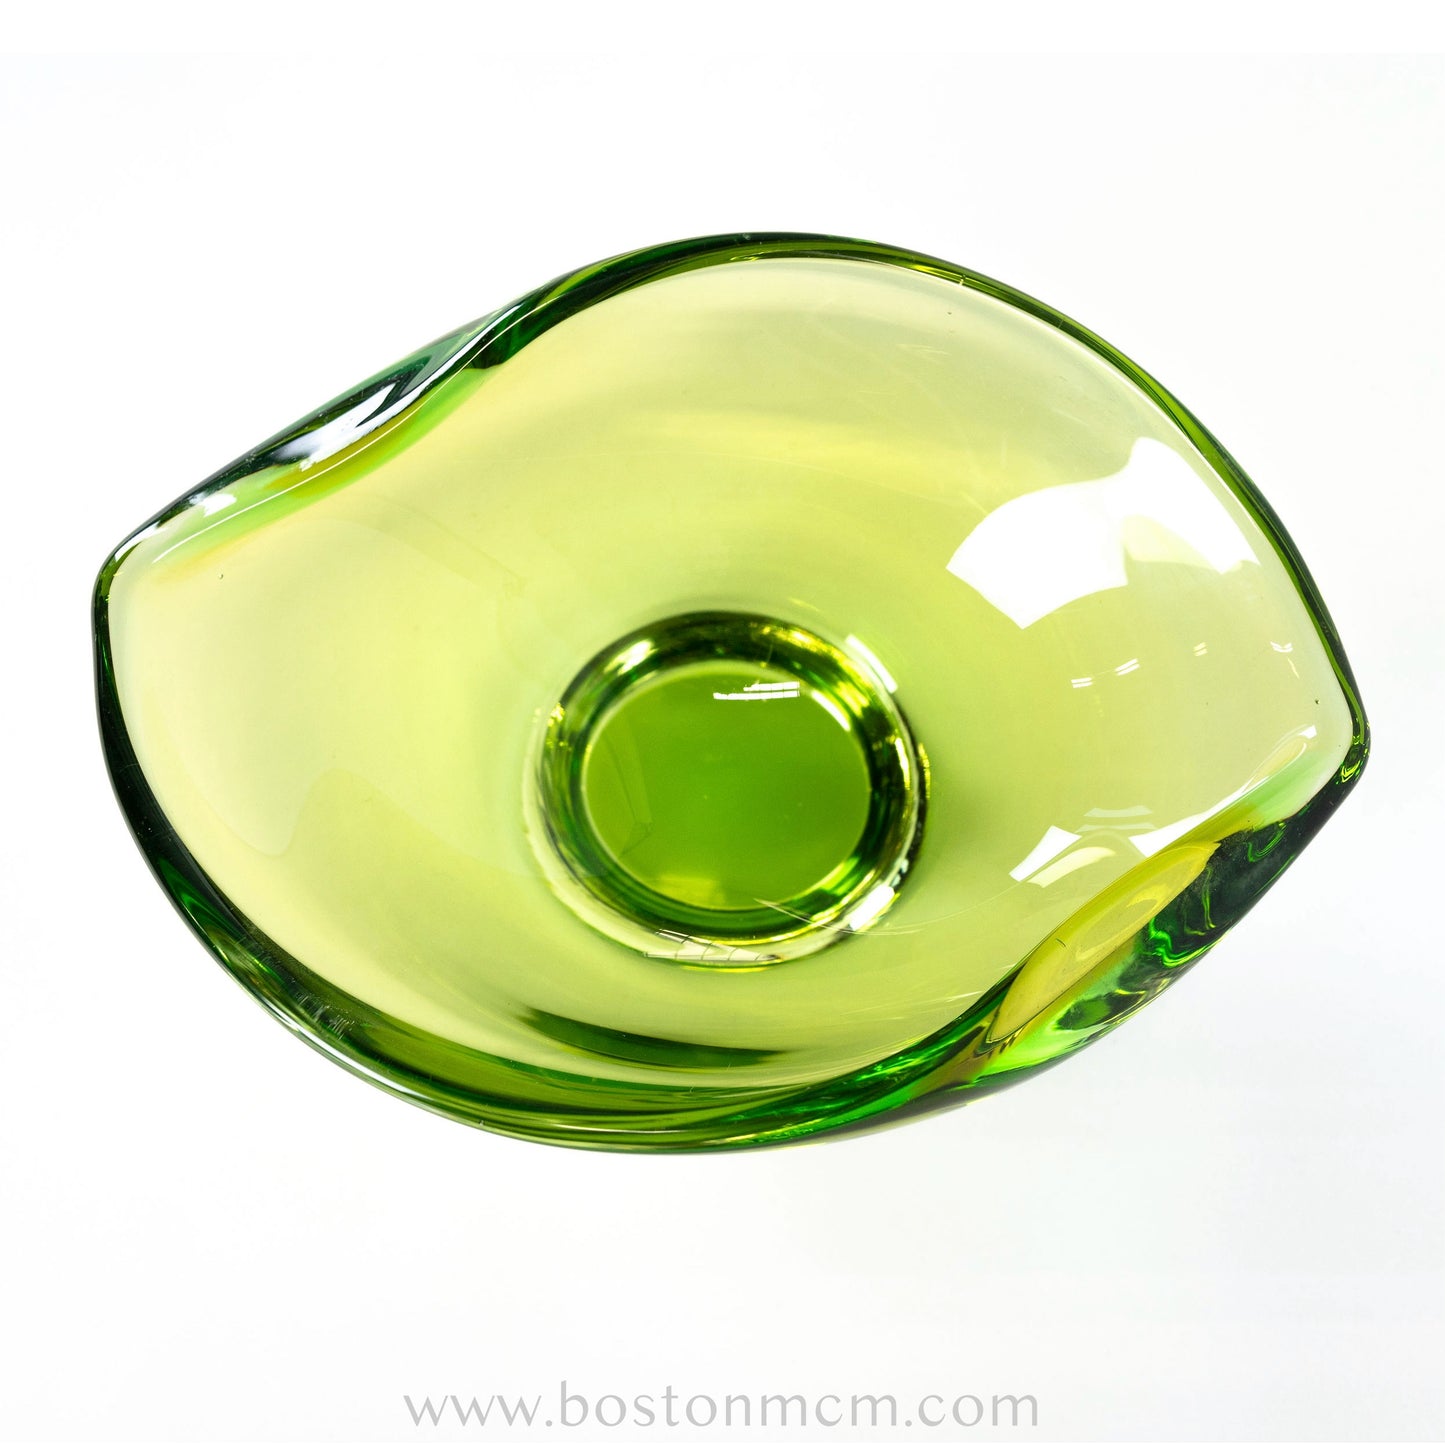 Italian Murano Art Glass Green Bowl, Possibly Sommerso